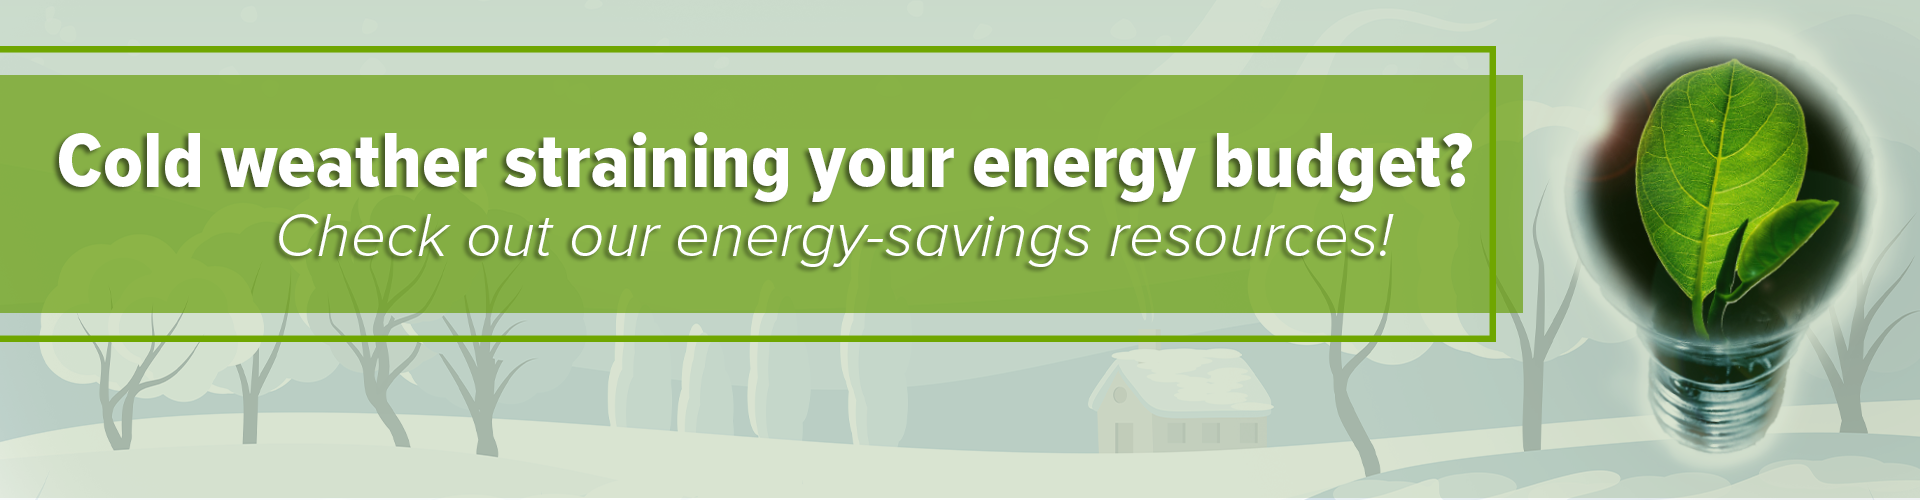 Click for energy-saving resources!